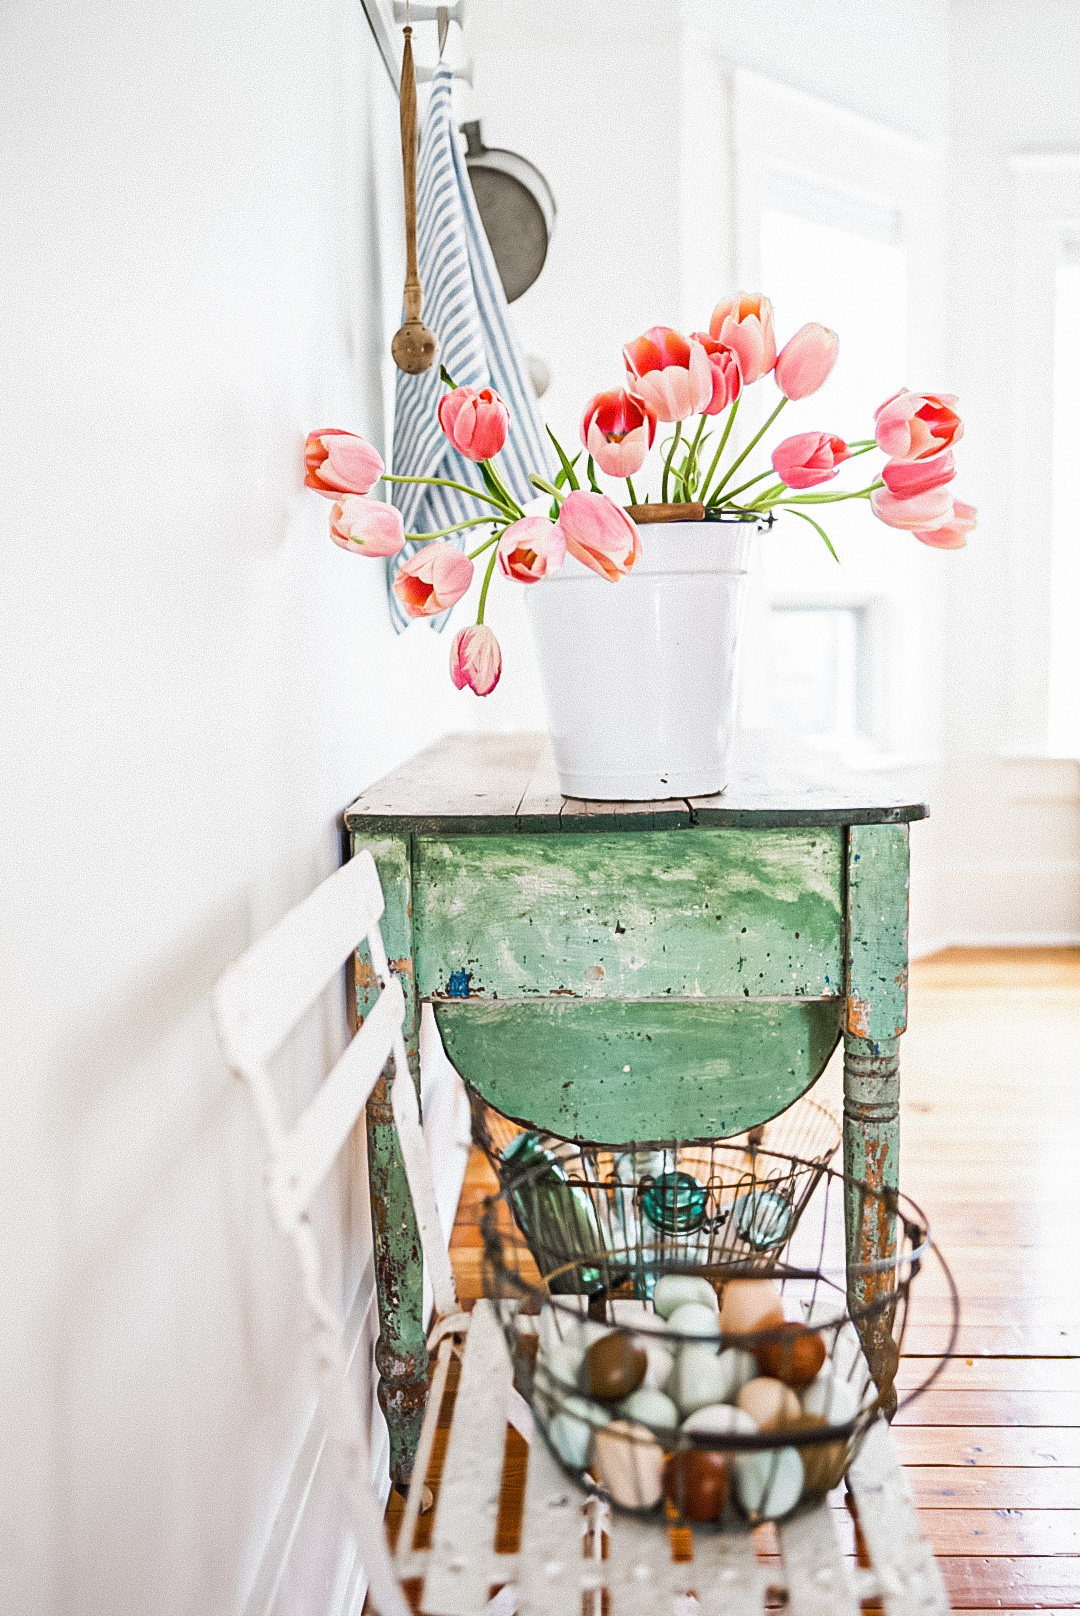 7 Tips on How to Decorate with Vintage Home Decor